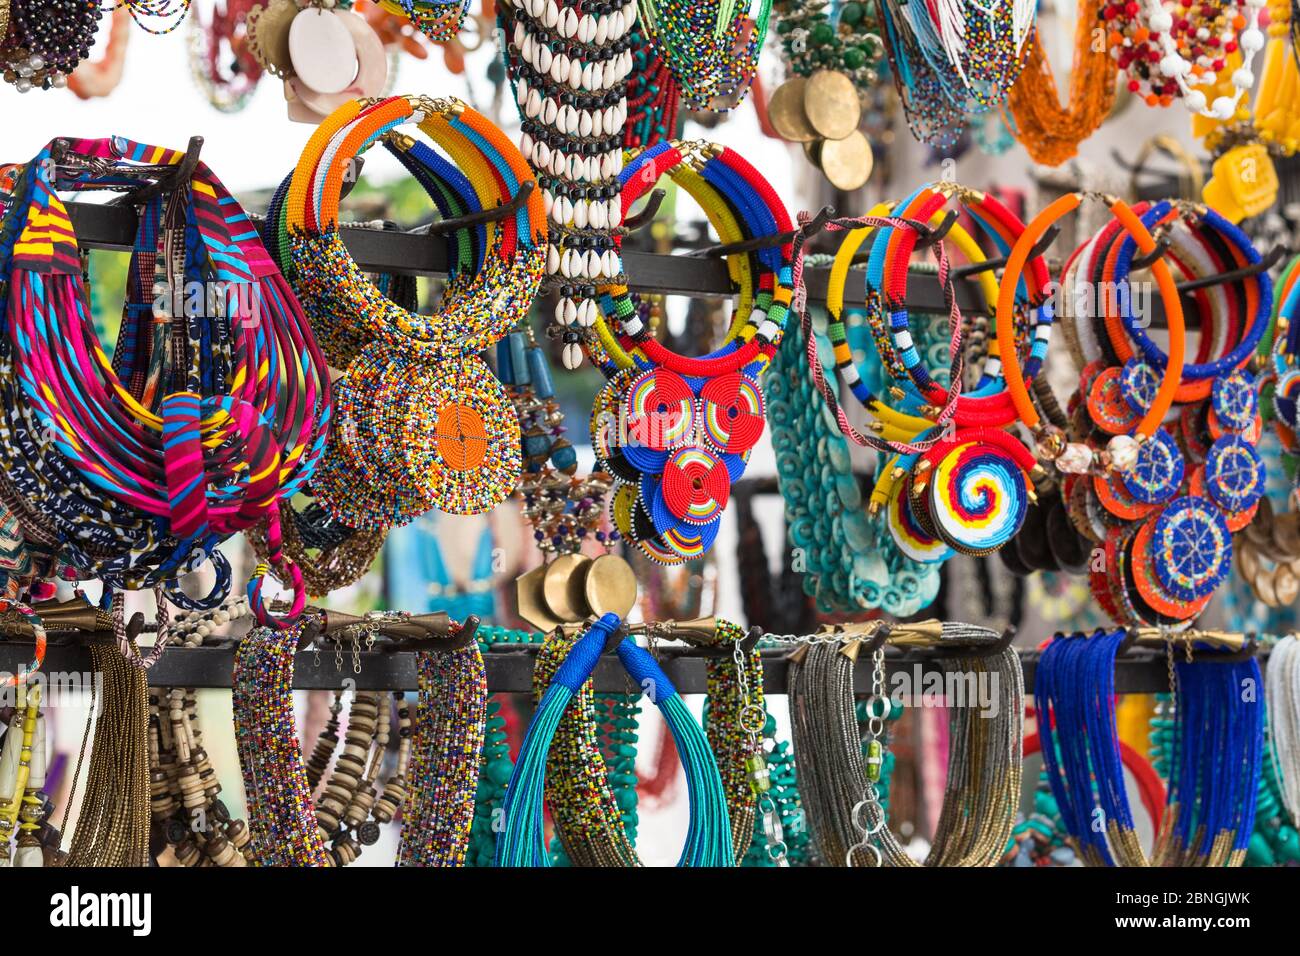 African bead necklaces, items, objects, ethnic and traditional fashionable ladies costume jewellery on display Stock Photo